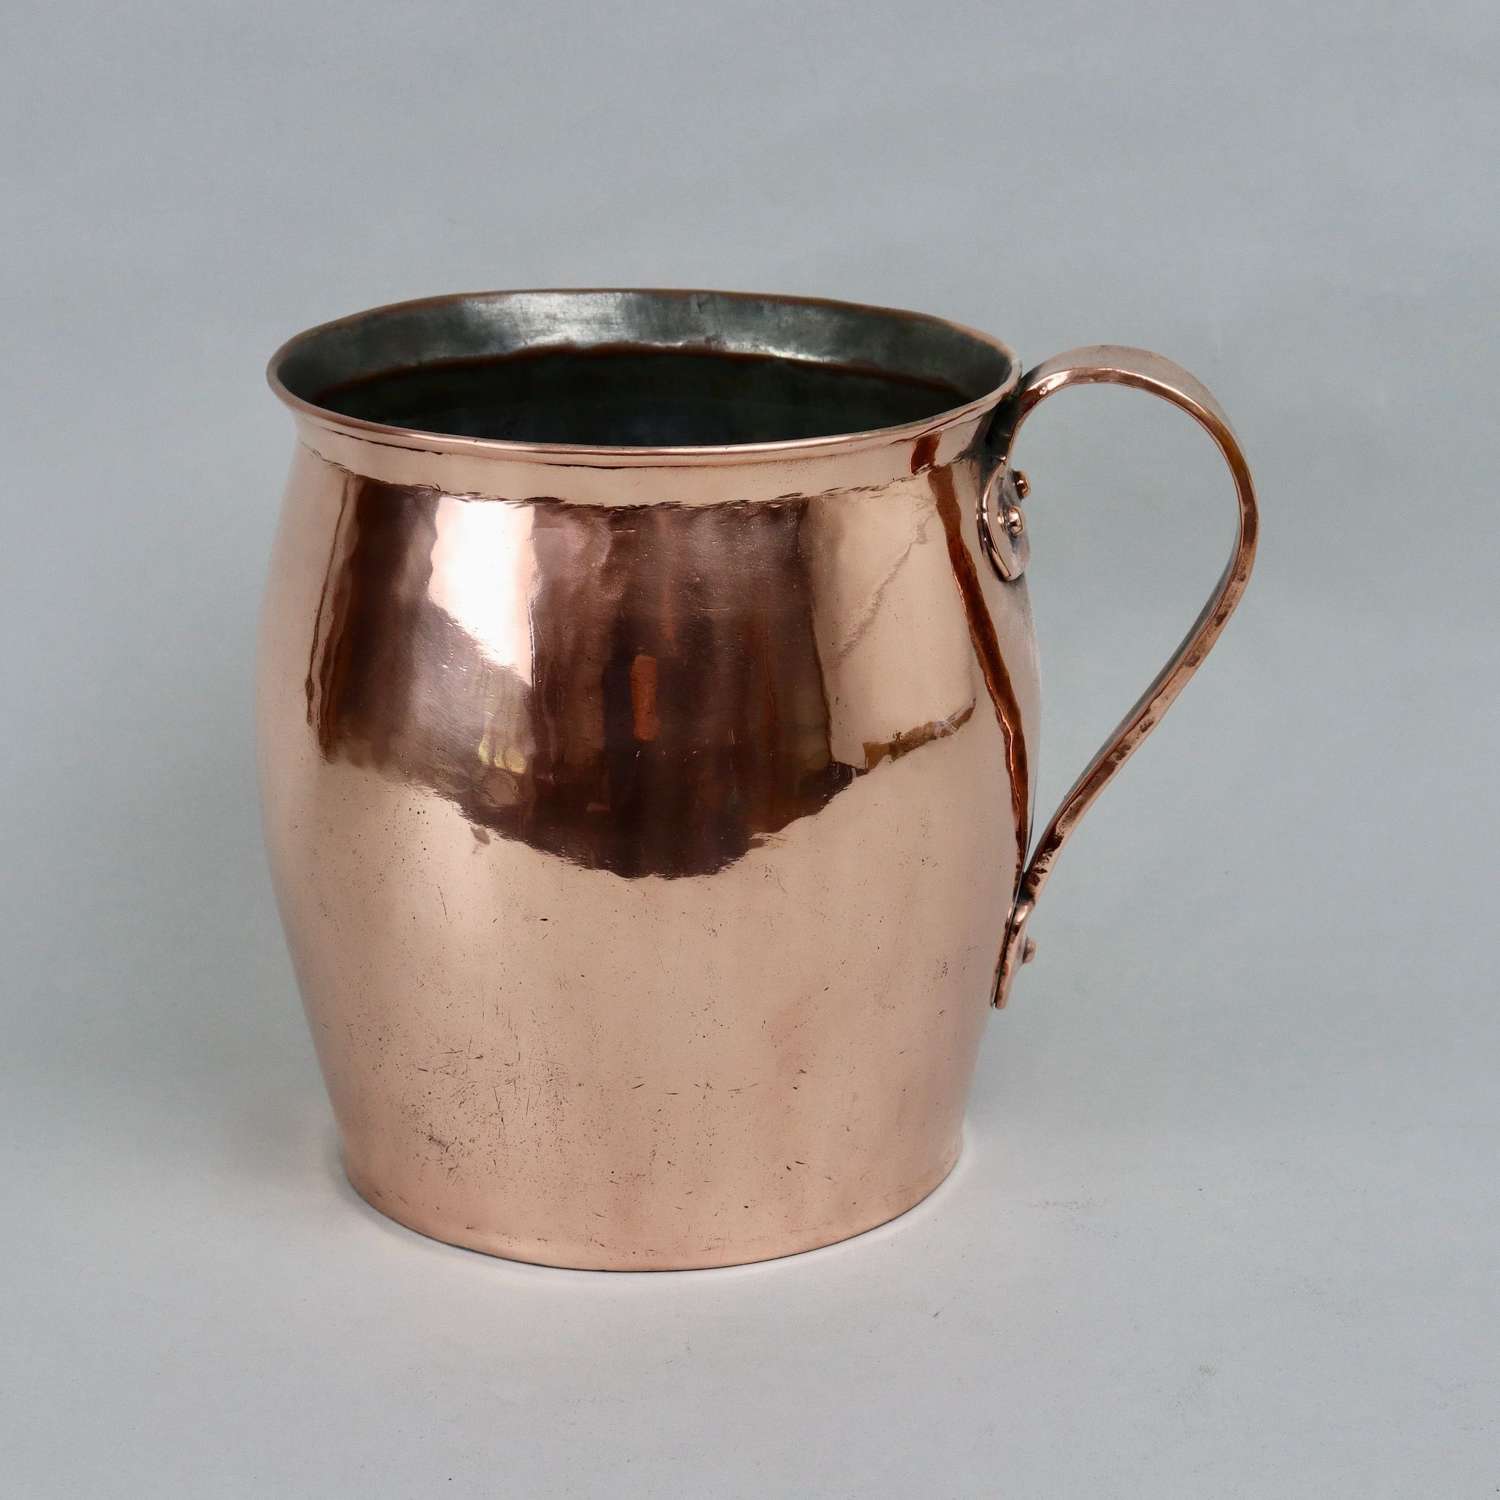 Early 19th century copper pot